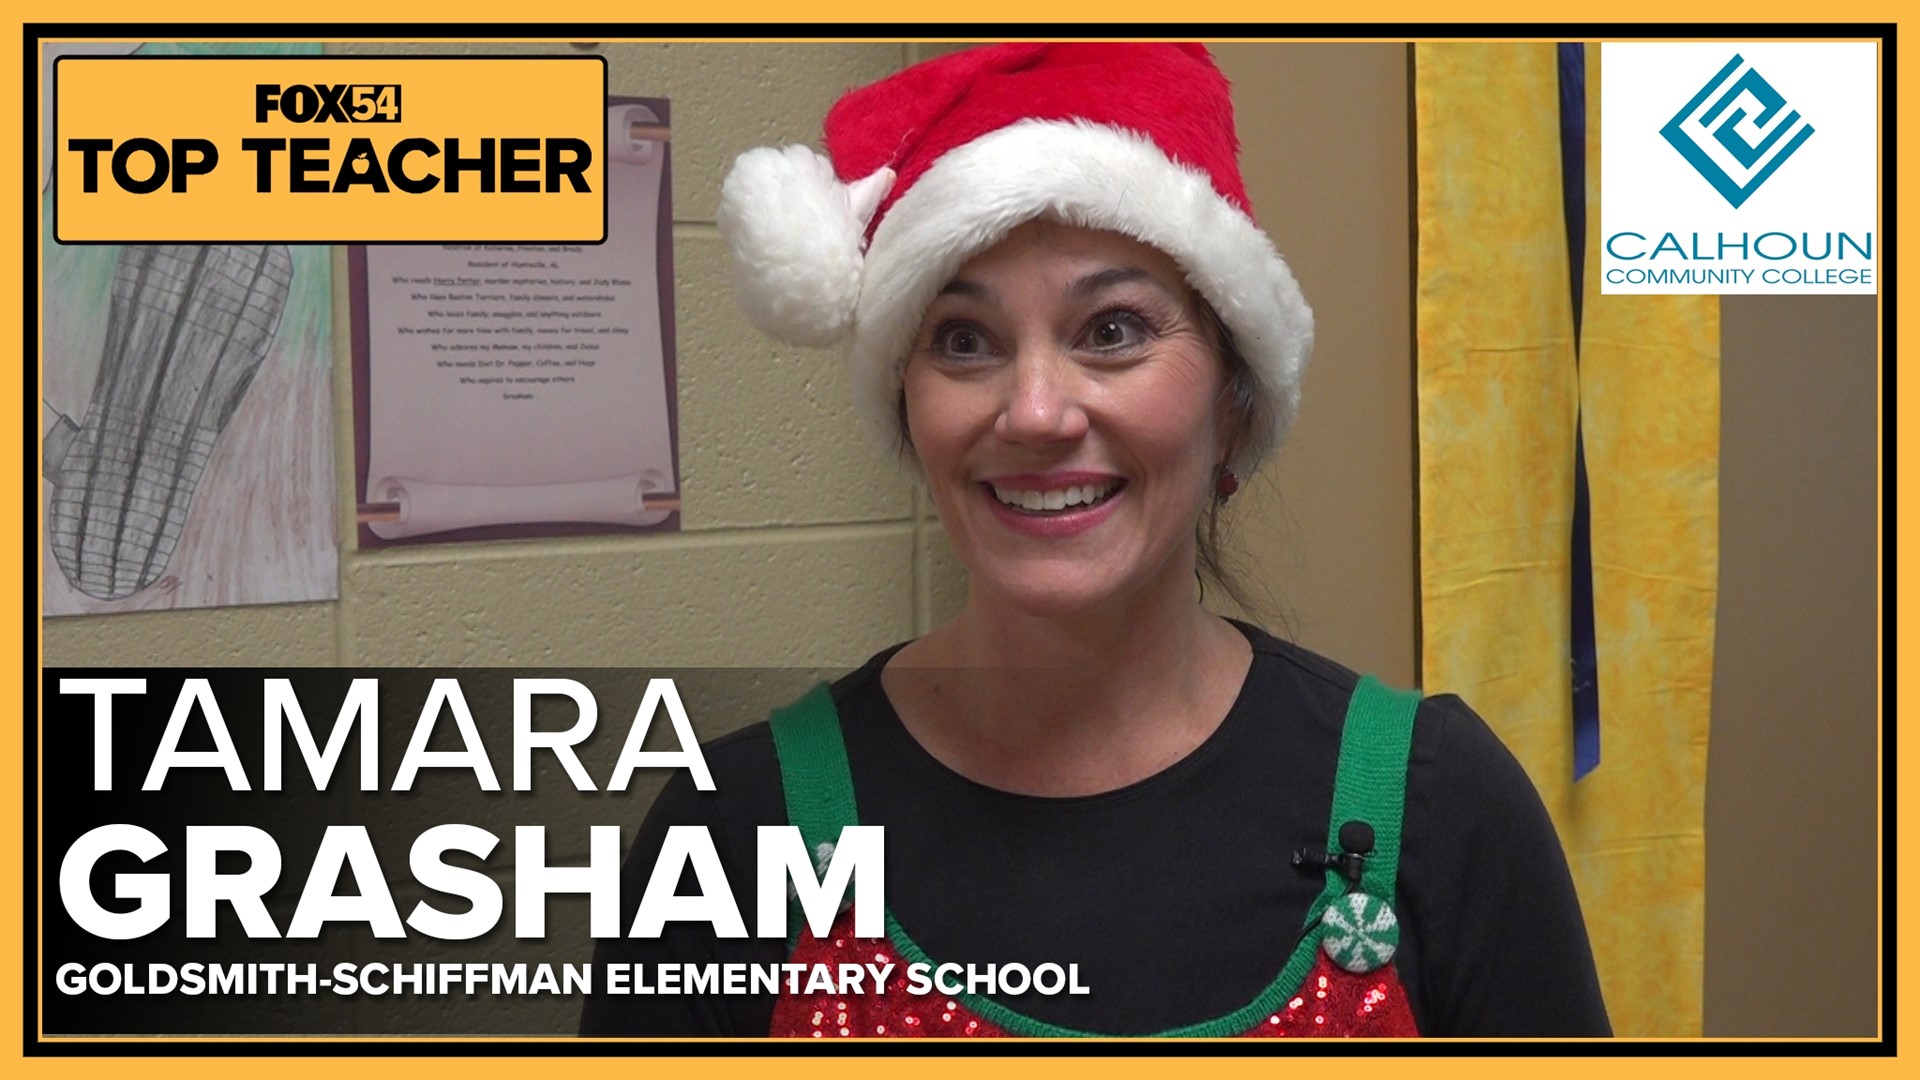 Top Teacher Tamara Grasham of Goldsmith-Schiffman Elementary comes from a long line of teachers and loves what she does.